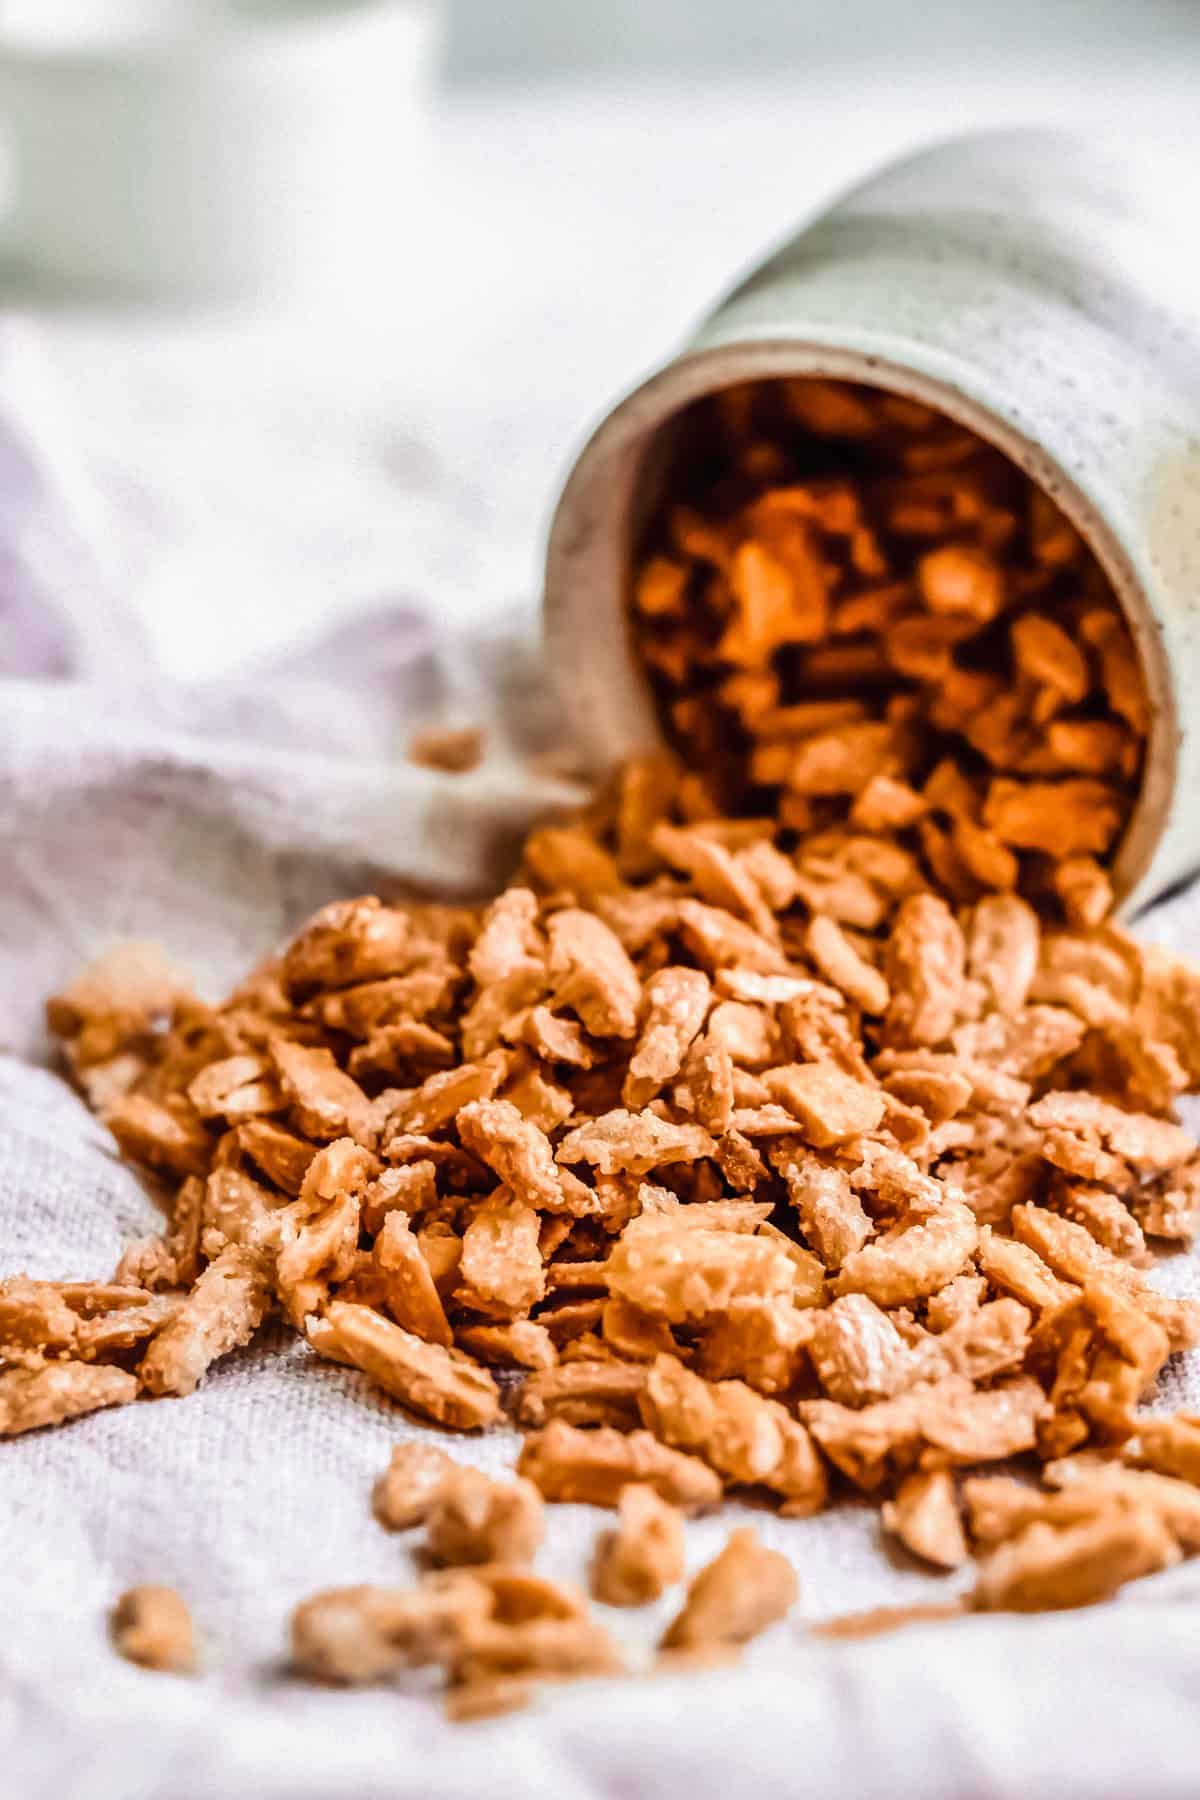 almonds spilling out of a ceramic container